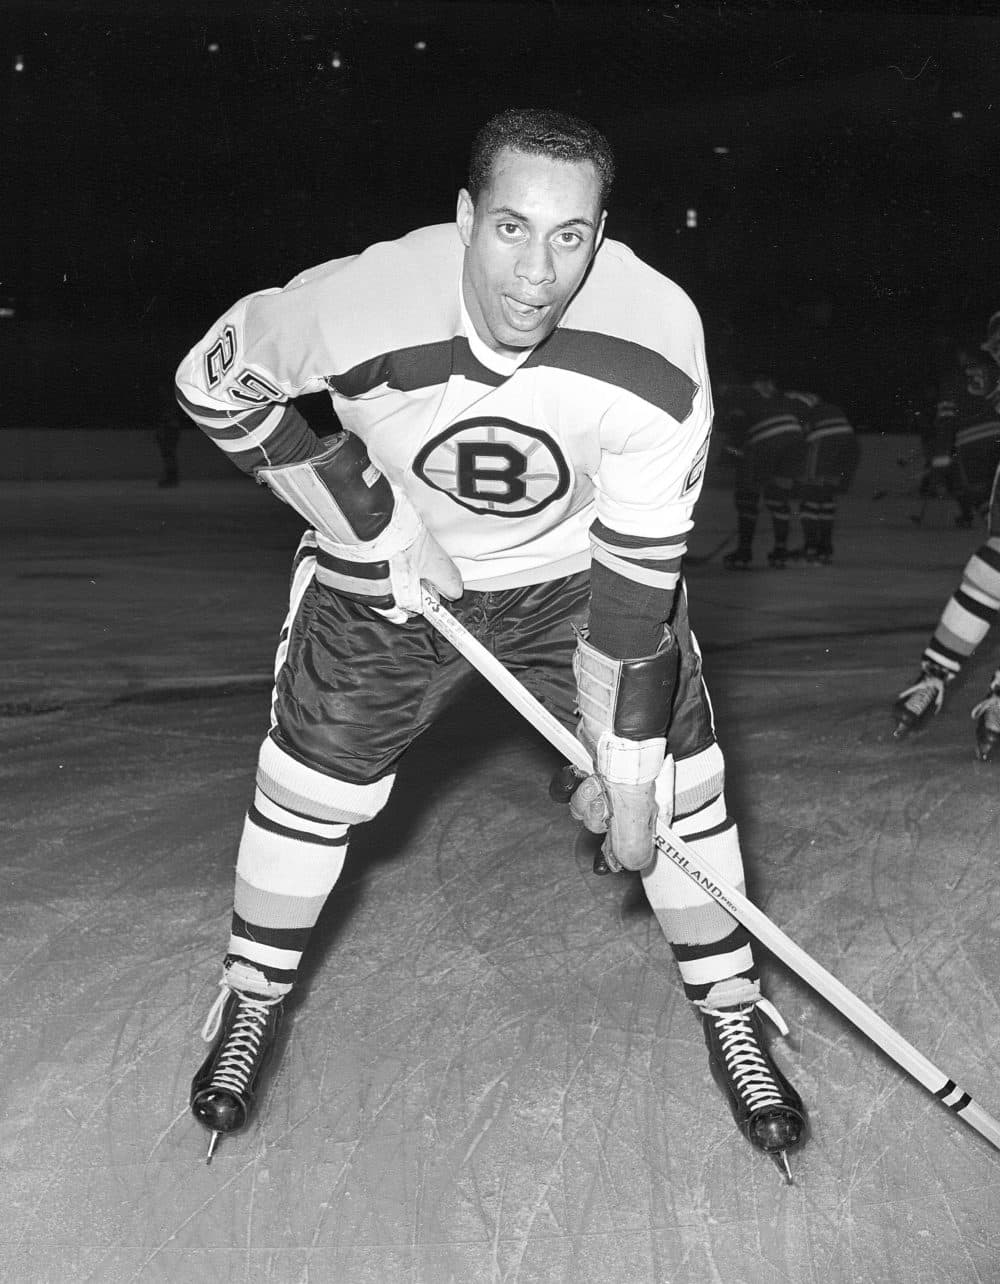 Local hockey greats inducted into RI Hockey Hall of Fame